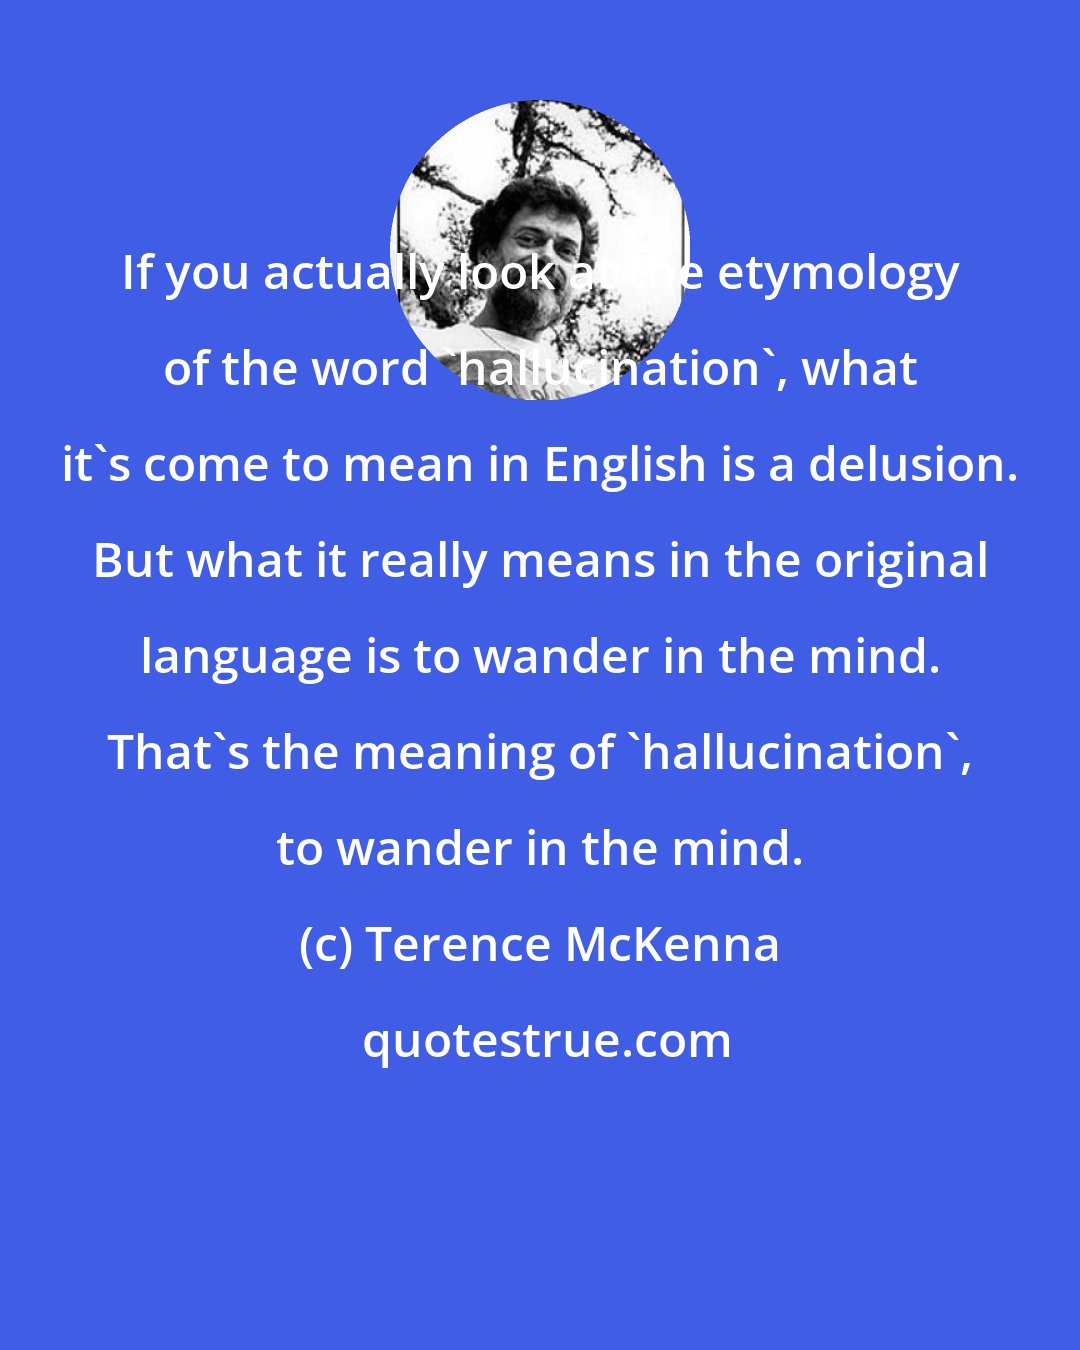 Terence McKenna: If you actually look at the etymology of the word 'hallucination', what it's come to mean in English is a delusion. But what it really means in the original language is to wander in the mind. That's the meaning of 'hallucination', to wander in the mind.